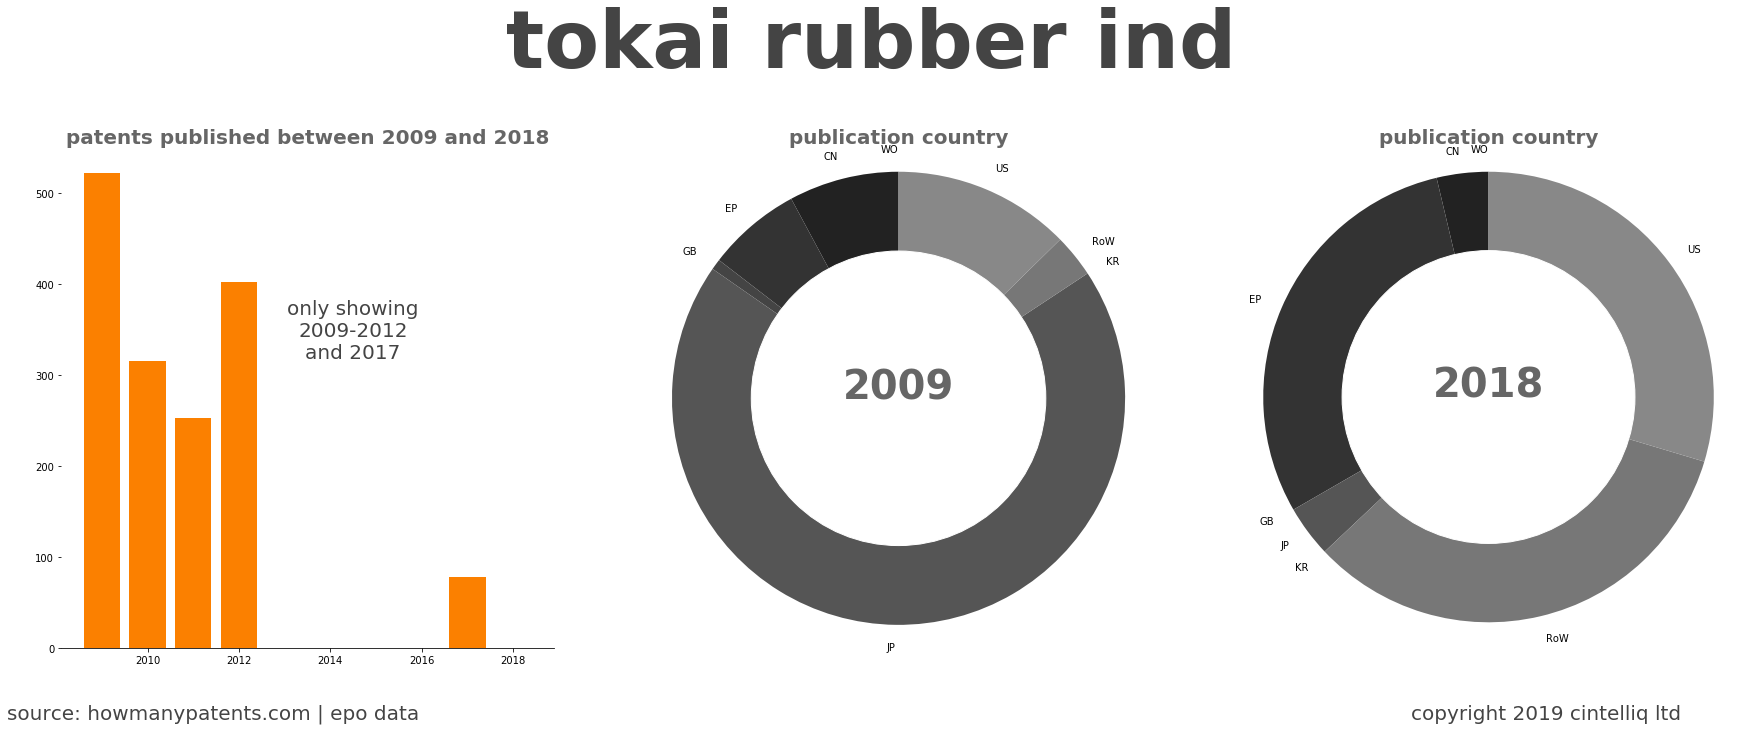 summary of patents for Tokai Rubber Ind